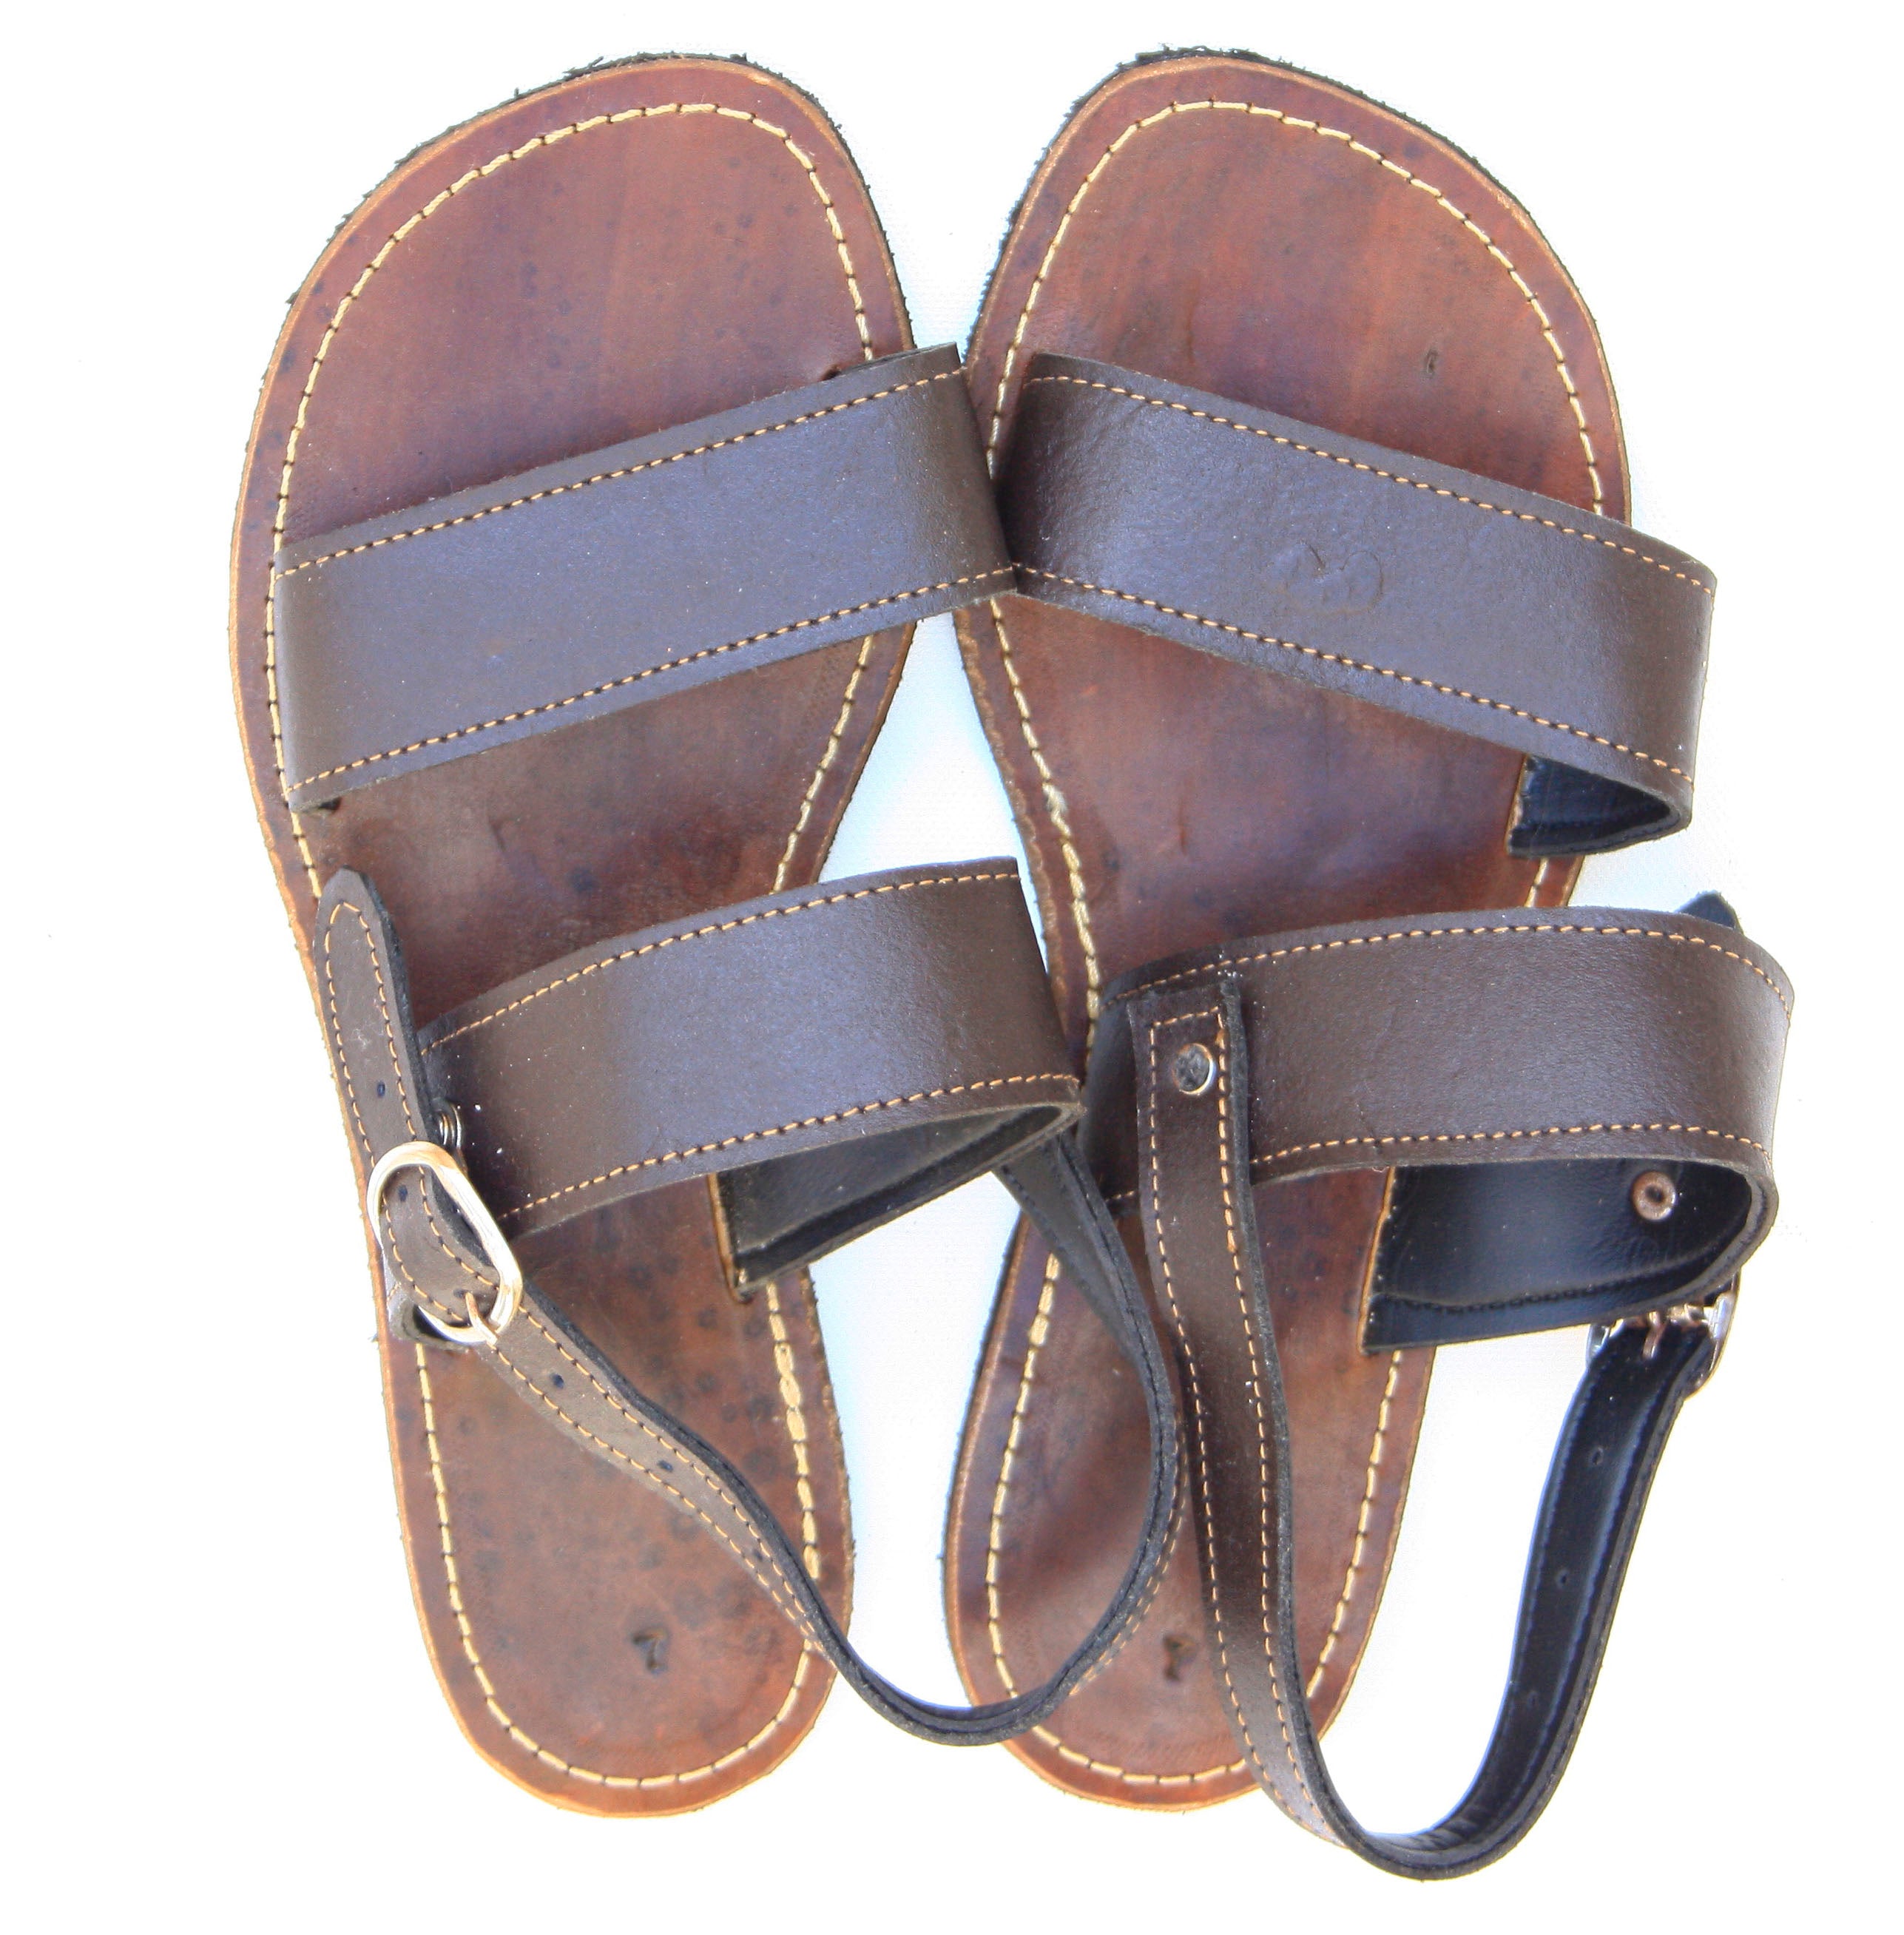 Shop Sandals & Thongs Online and in Store - Kmart